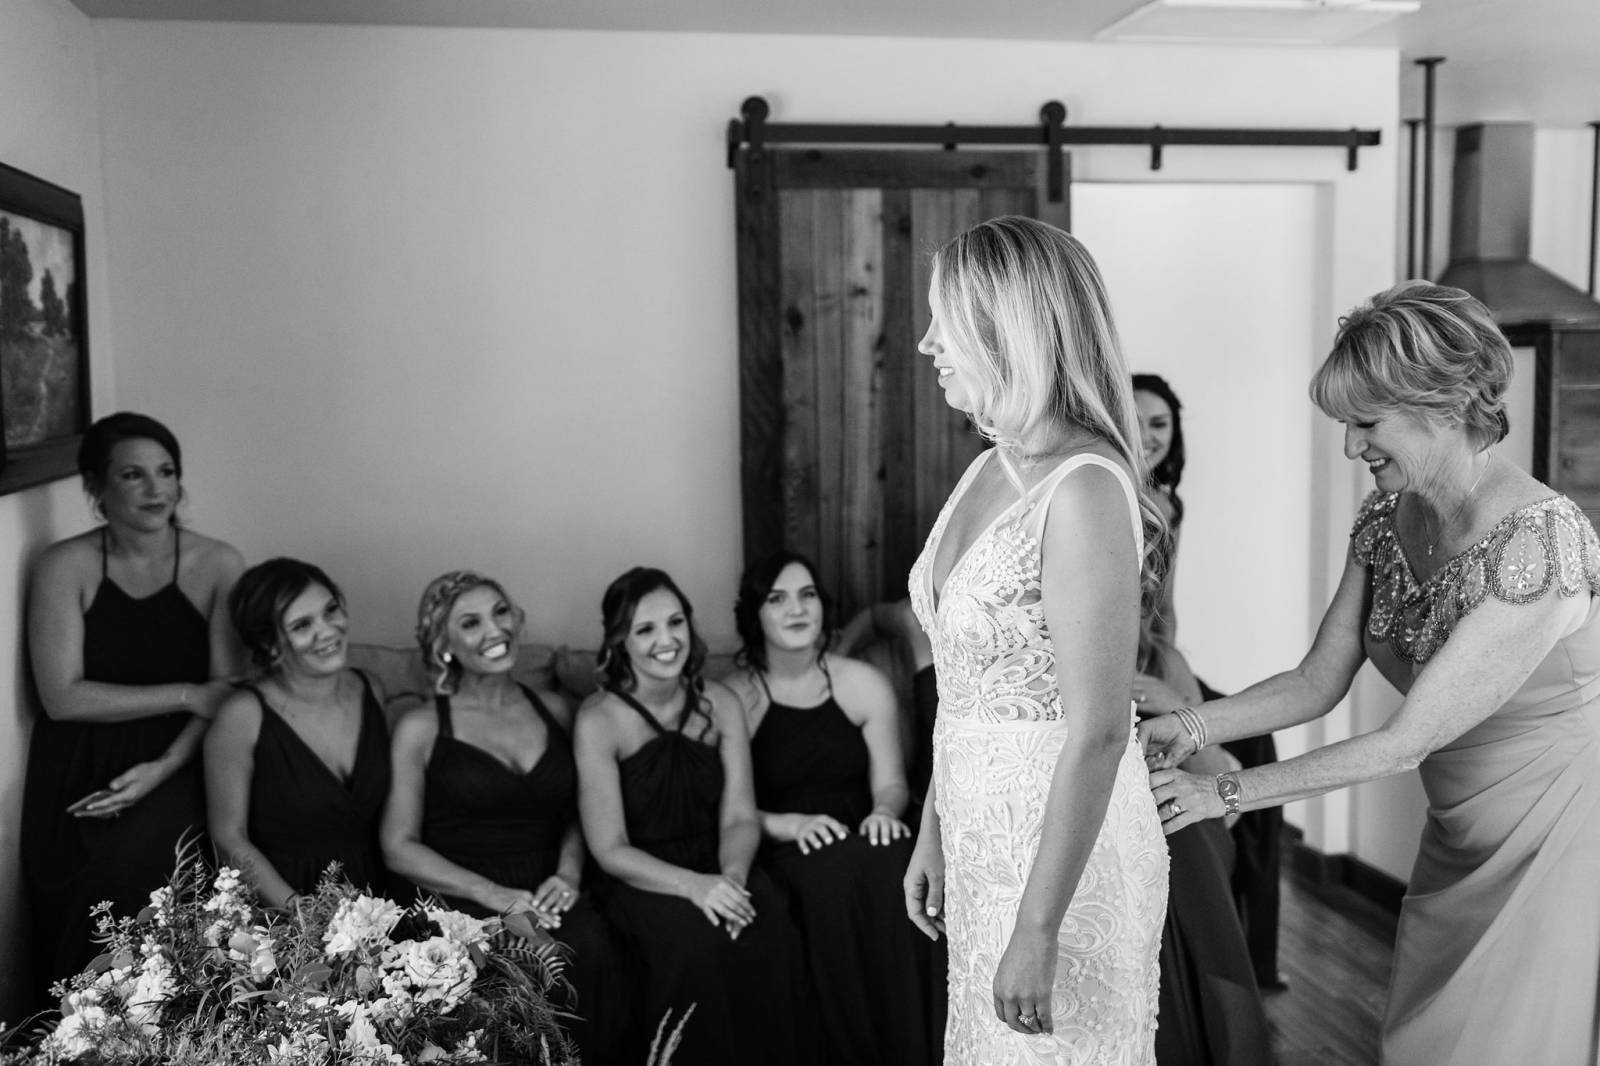 The Bridesmaid Waiting For the Bride Getting Ready for Her Wedding | The Wedding Standard